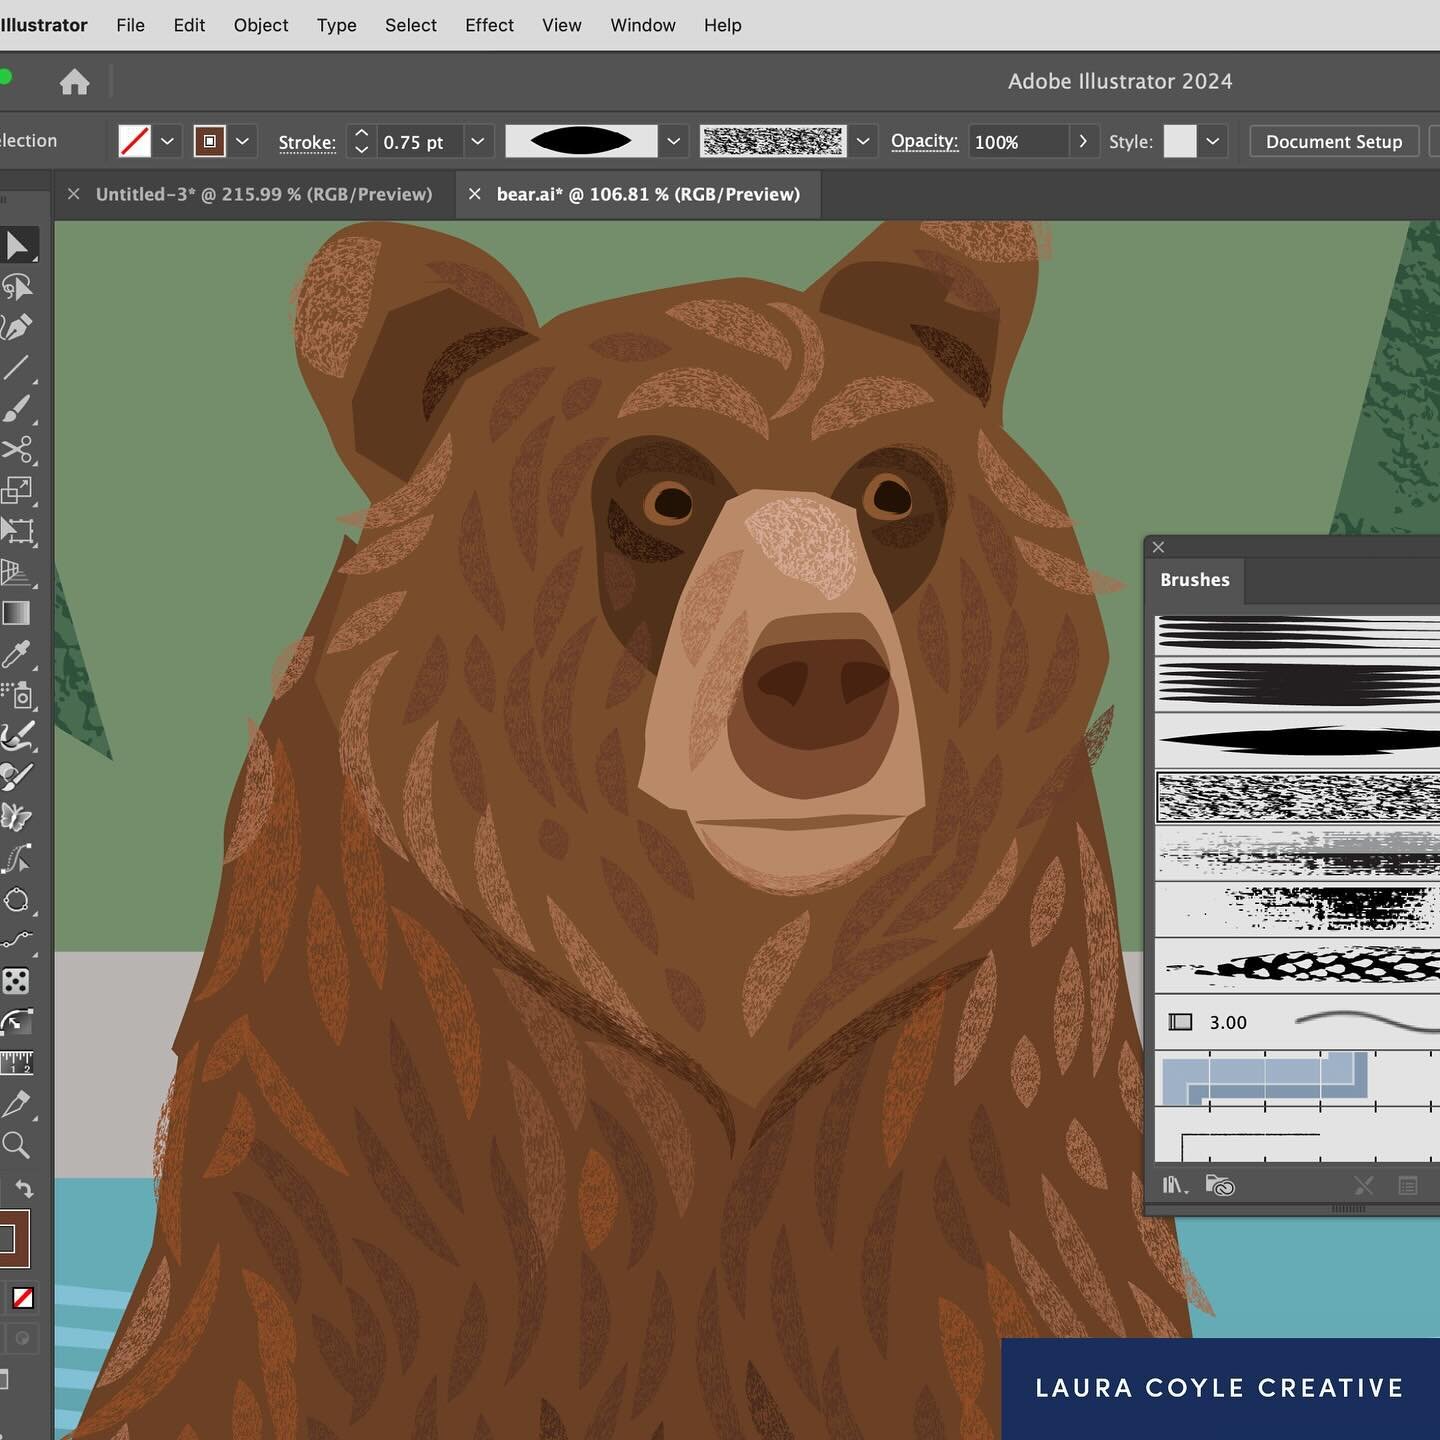 In today&rsquo;s Zoom, I tackled a bear!! 

A community member challenged me to see how I would approach illustrating the bear in this photo using Illustrator shapes and brushes. I spent about 5 hours working on this before we took it apart layer by 